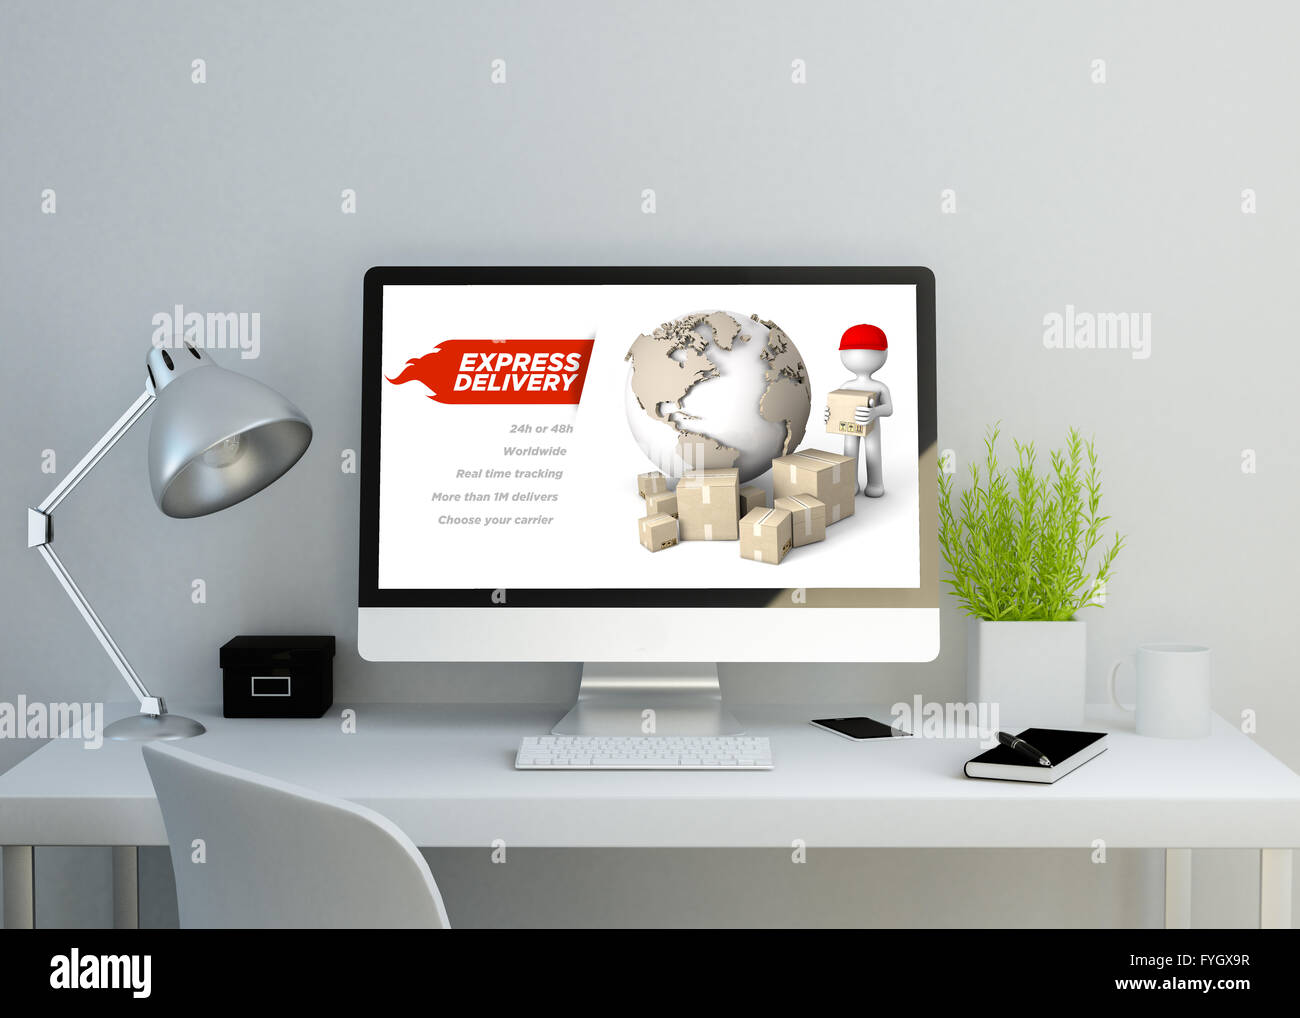 modern clean workspace mockup with express delivery website on screen. 3D illustration. all screen graphics are made up. Stock Photo